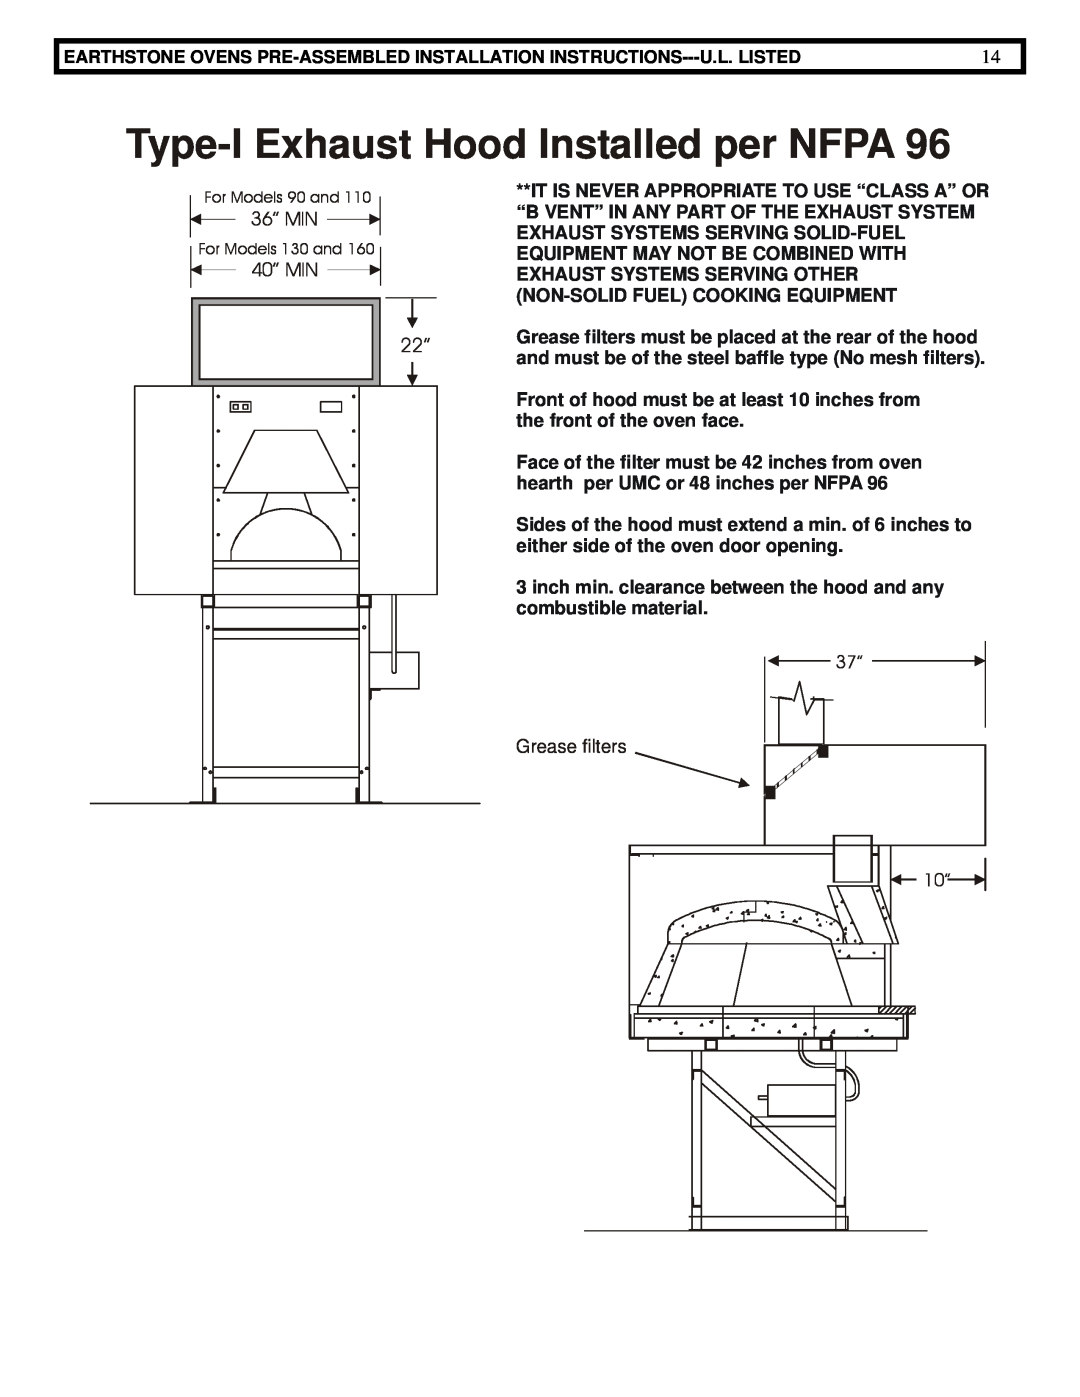 EarthStone woofire oven installation instructions Type-IExhaust Hood Installed per NFPA, 36” MIN, 40” MIN 22” 